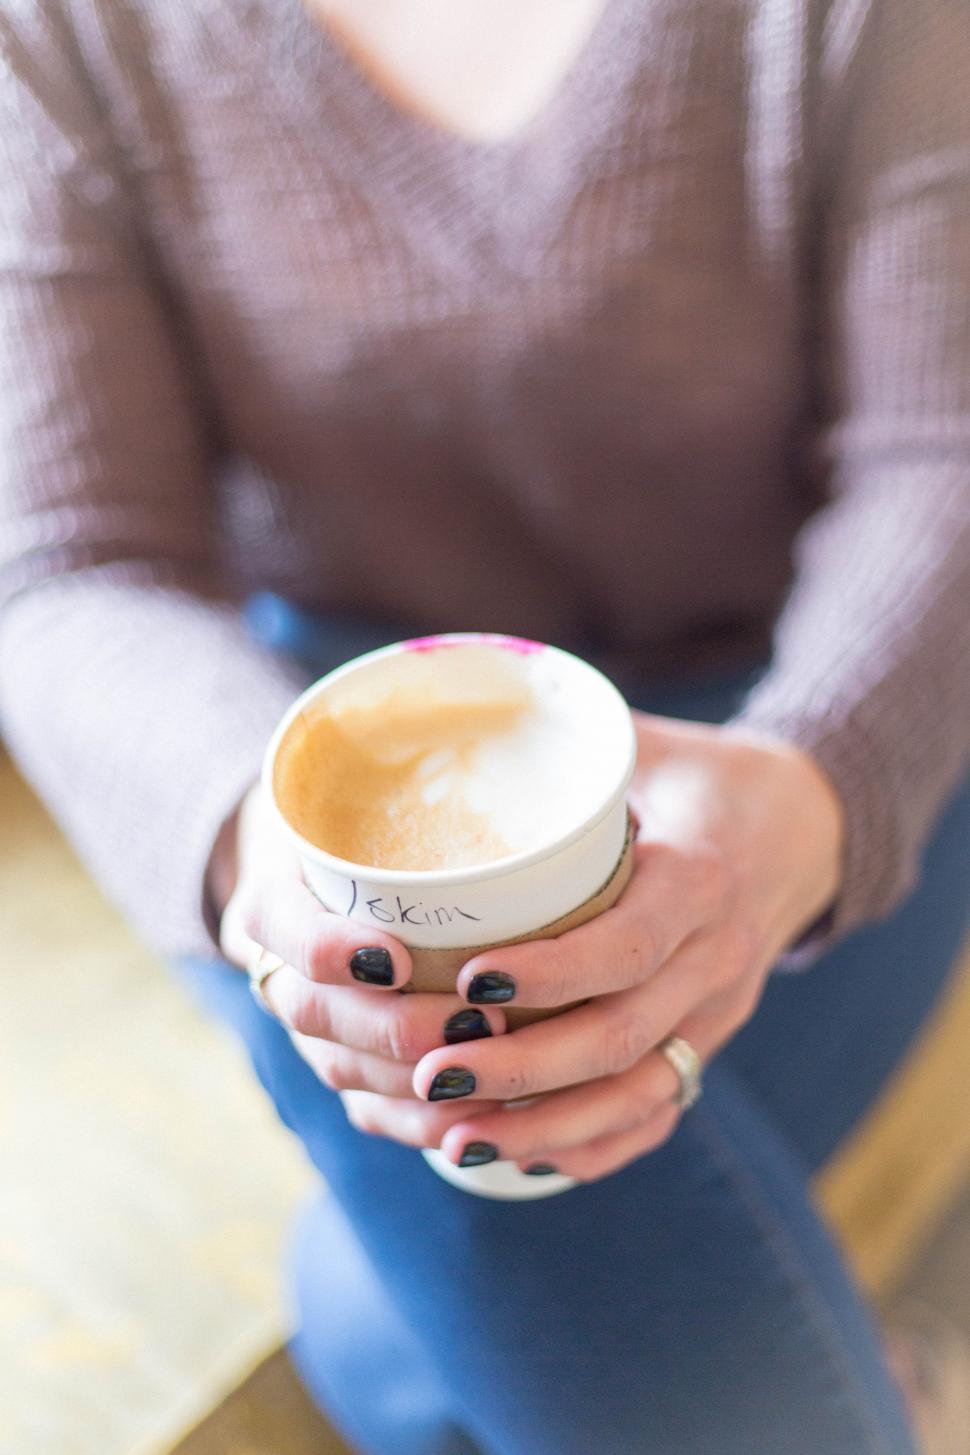 Free Image of A person holding a cup of coffee 